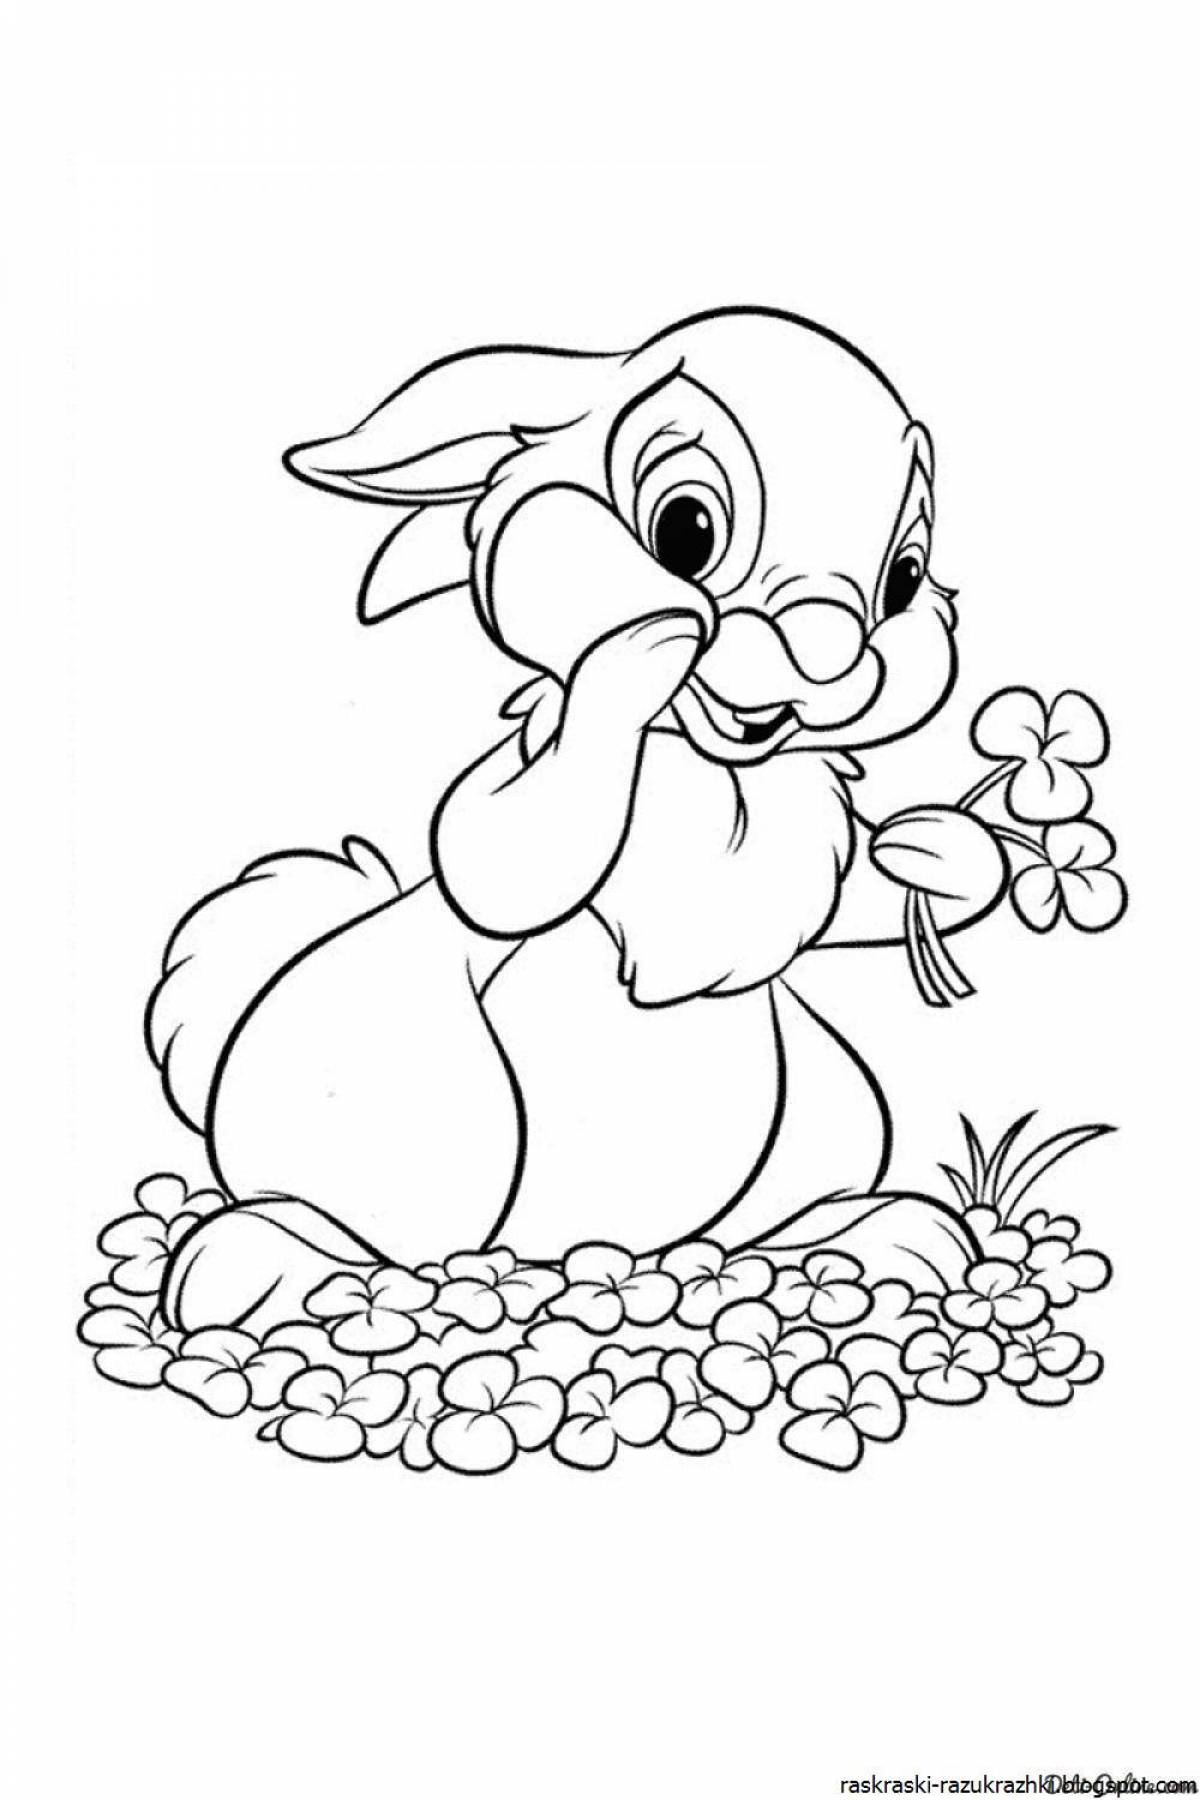 Charming coloring page bunny picture